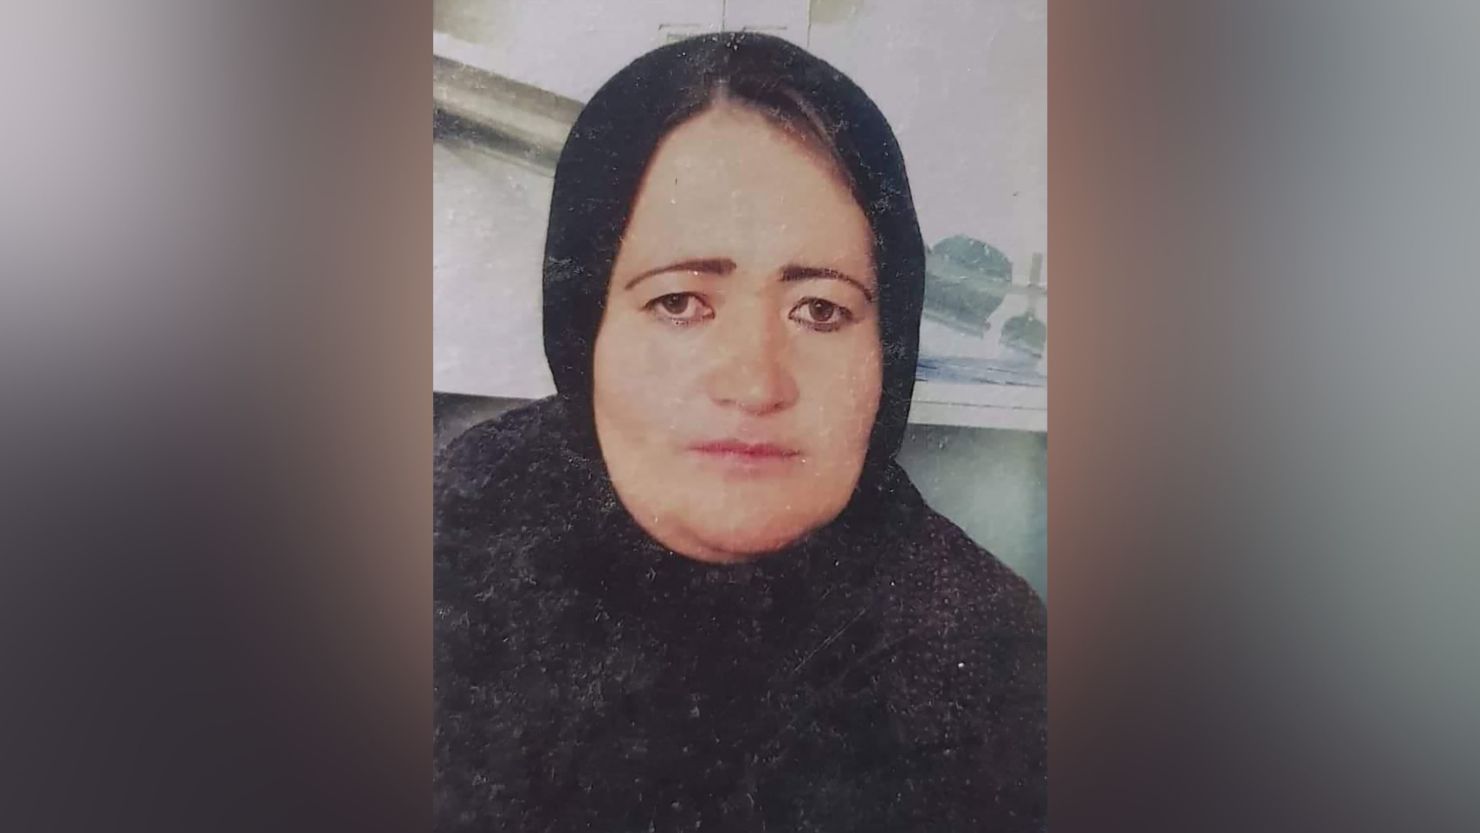 Negar Masoomi was killed in front of her family, according to her son.